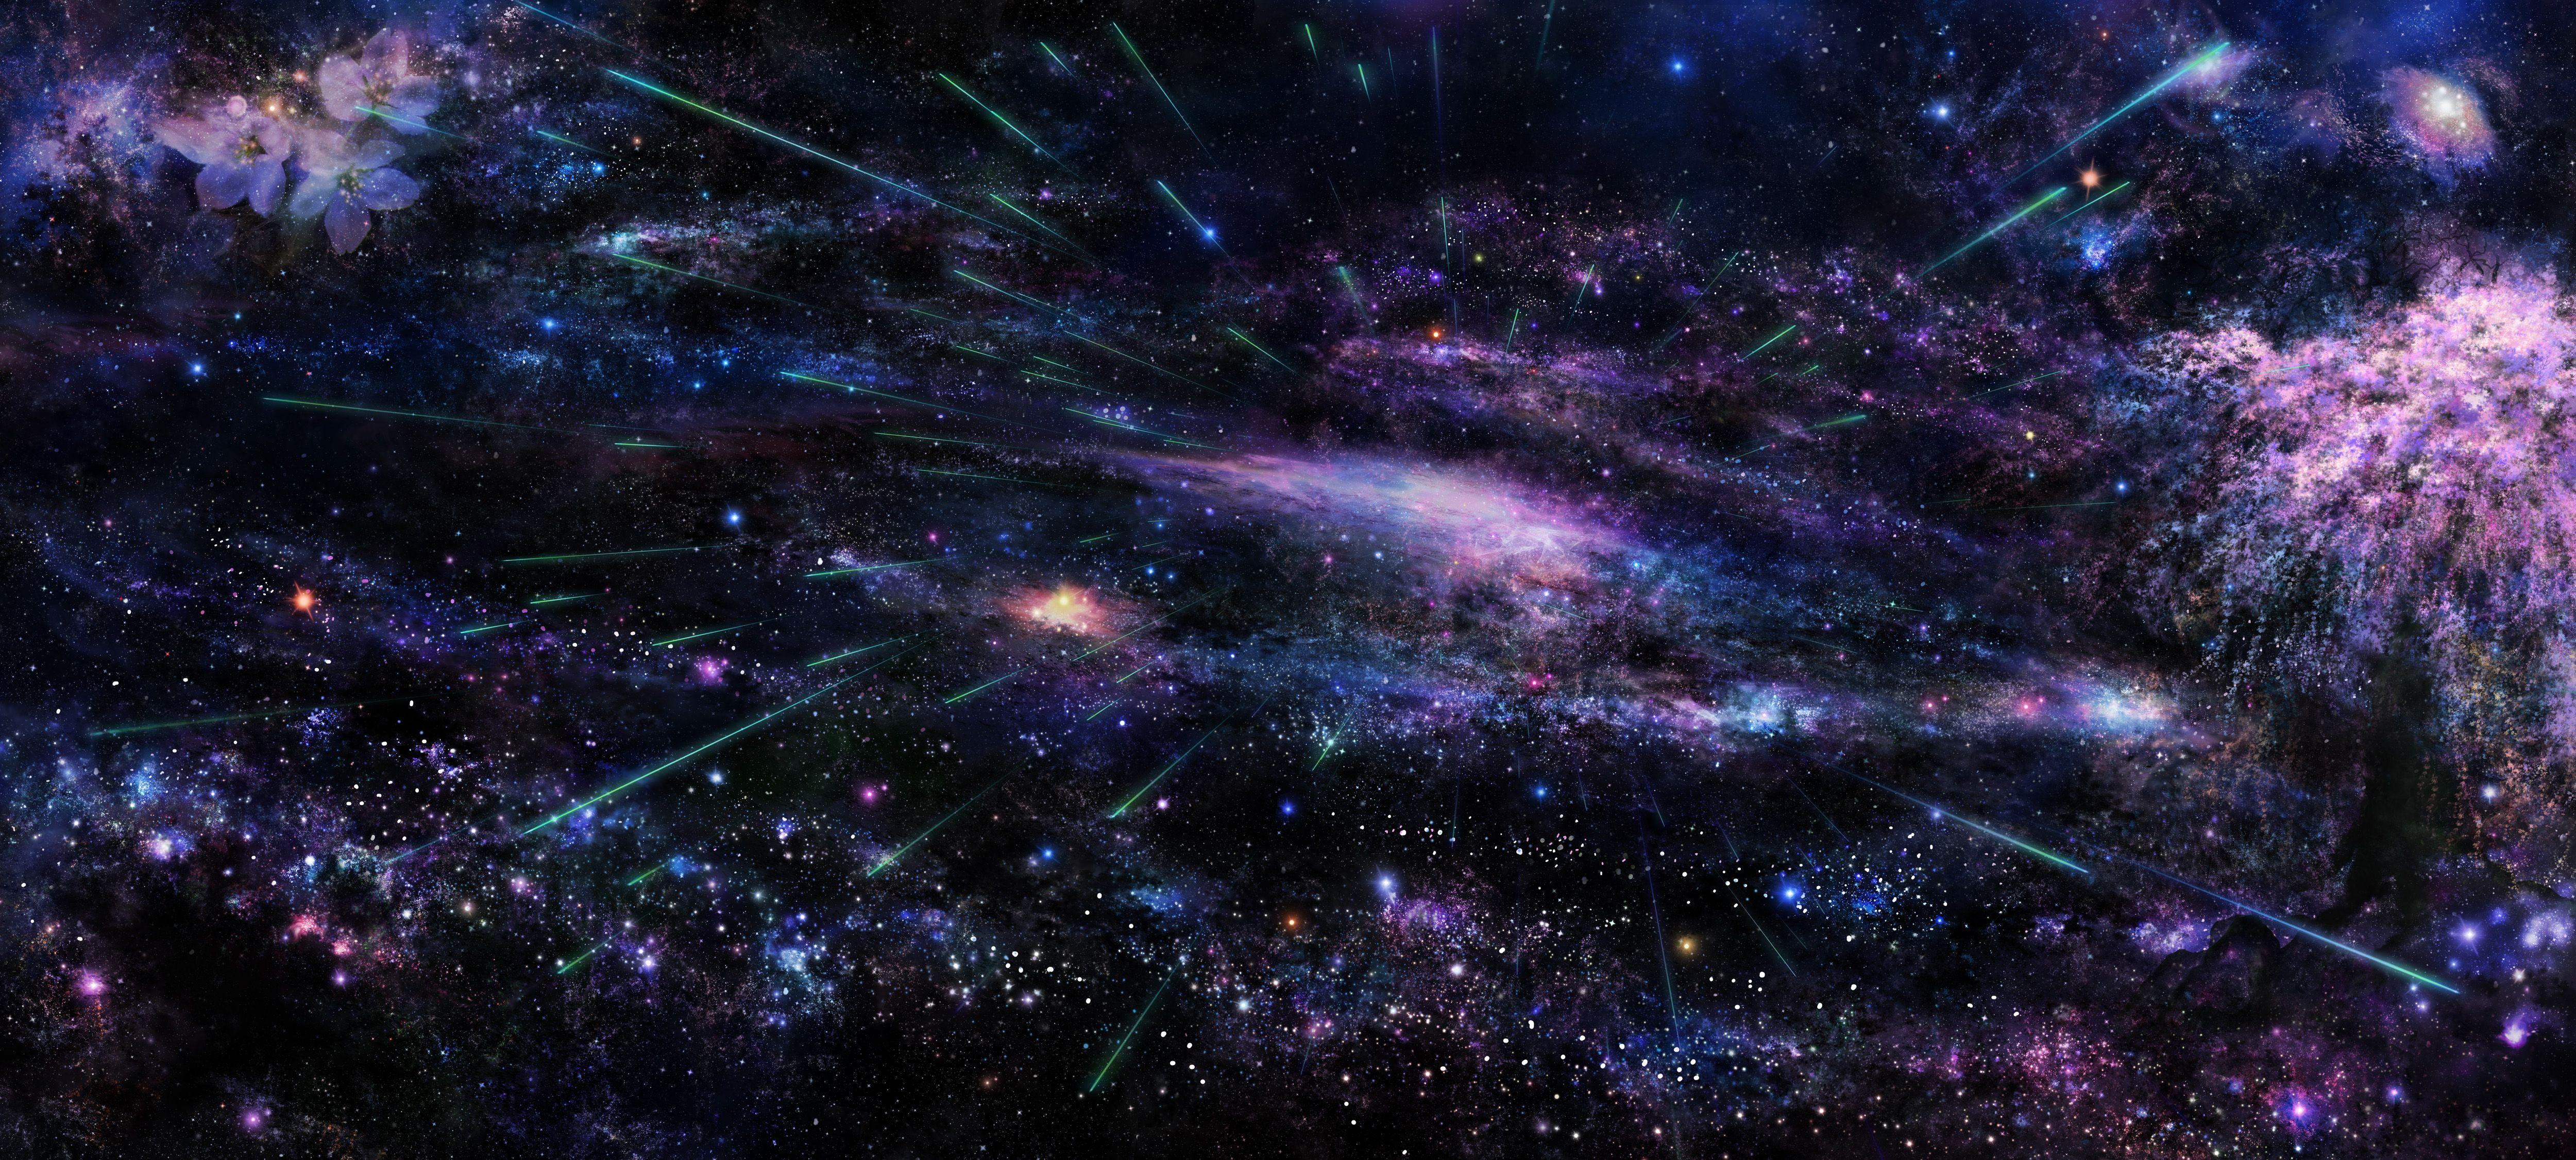 Made some anime space backgrounds 